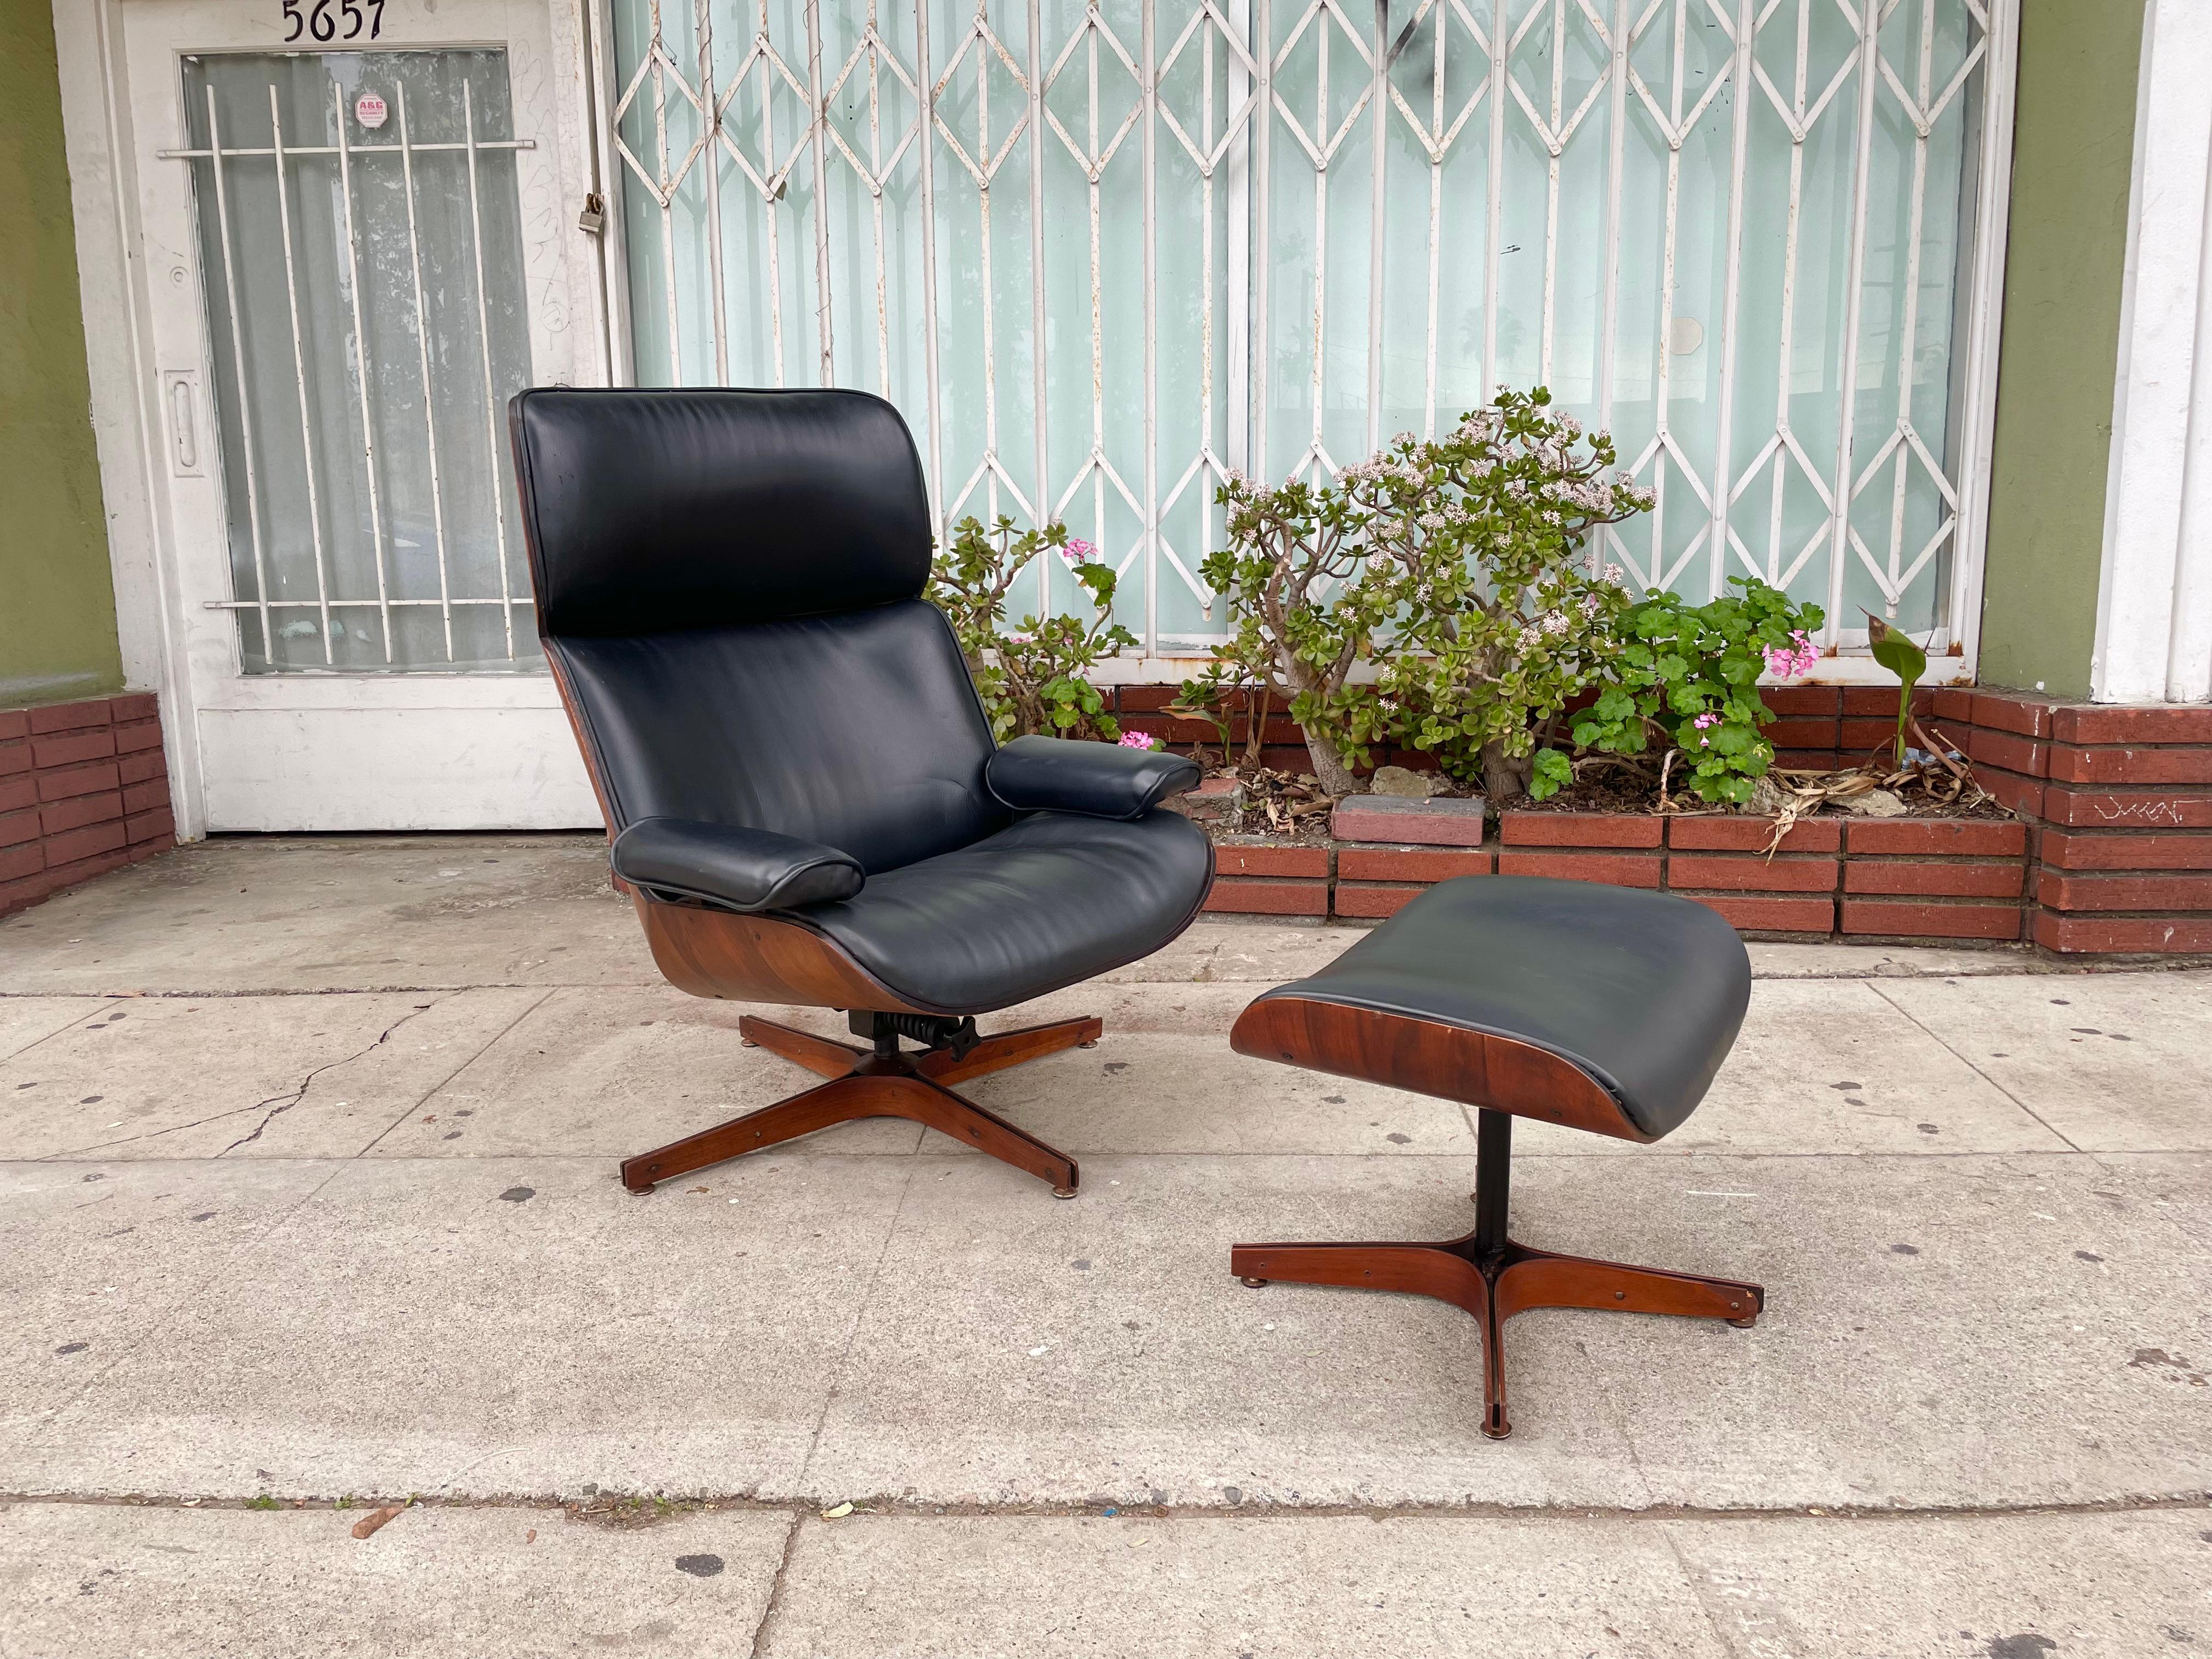 Beautiful midcentury lounge chair & ottoman designed by George Mulhauser and manufactured by Plycraft. This vintage chair and ottoman have a distinctive design and excellent representation of the midcentury era. The chair has a walnut frame wrapped